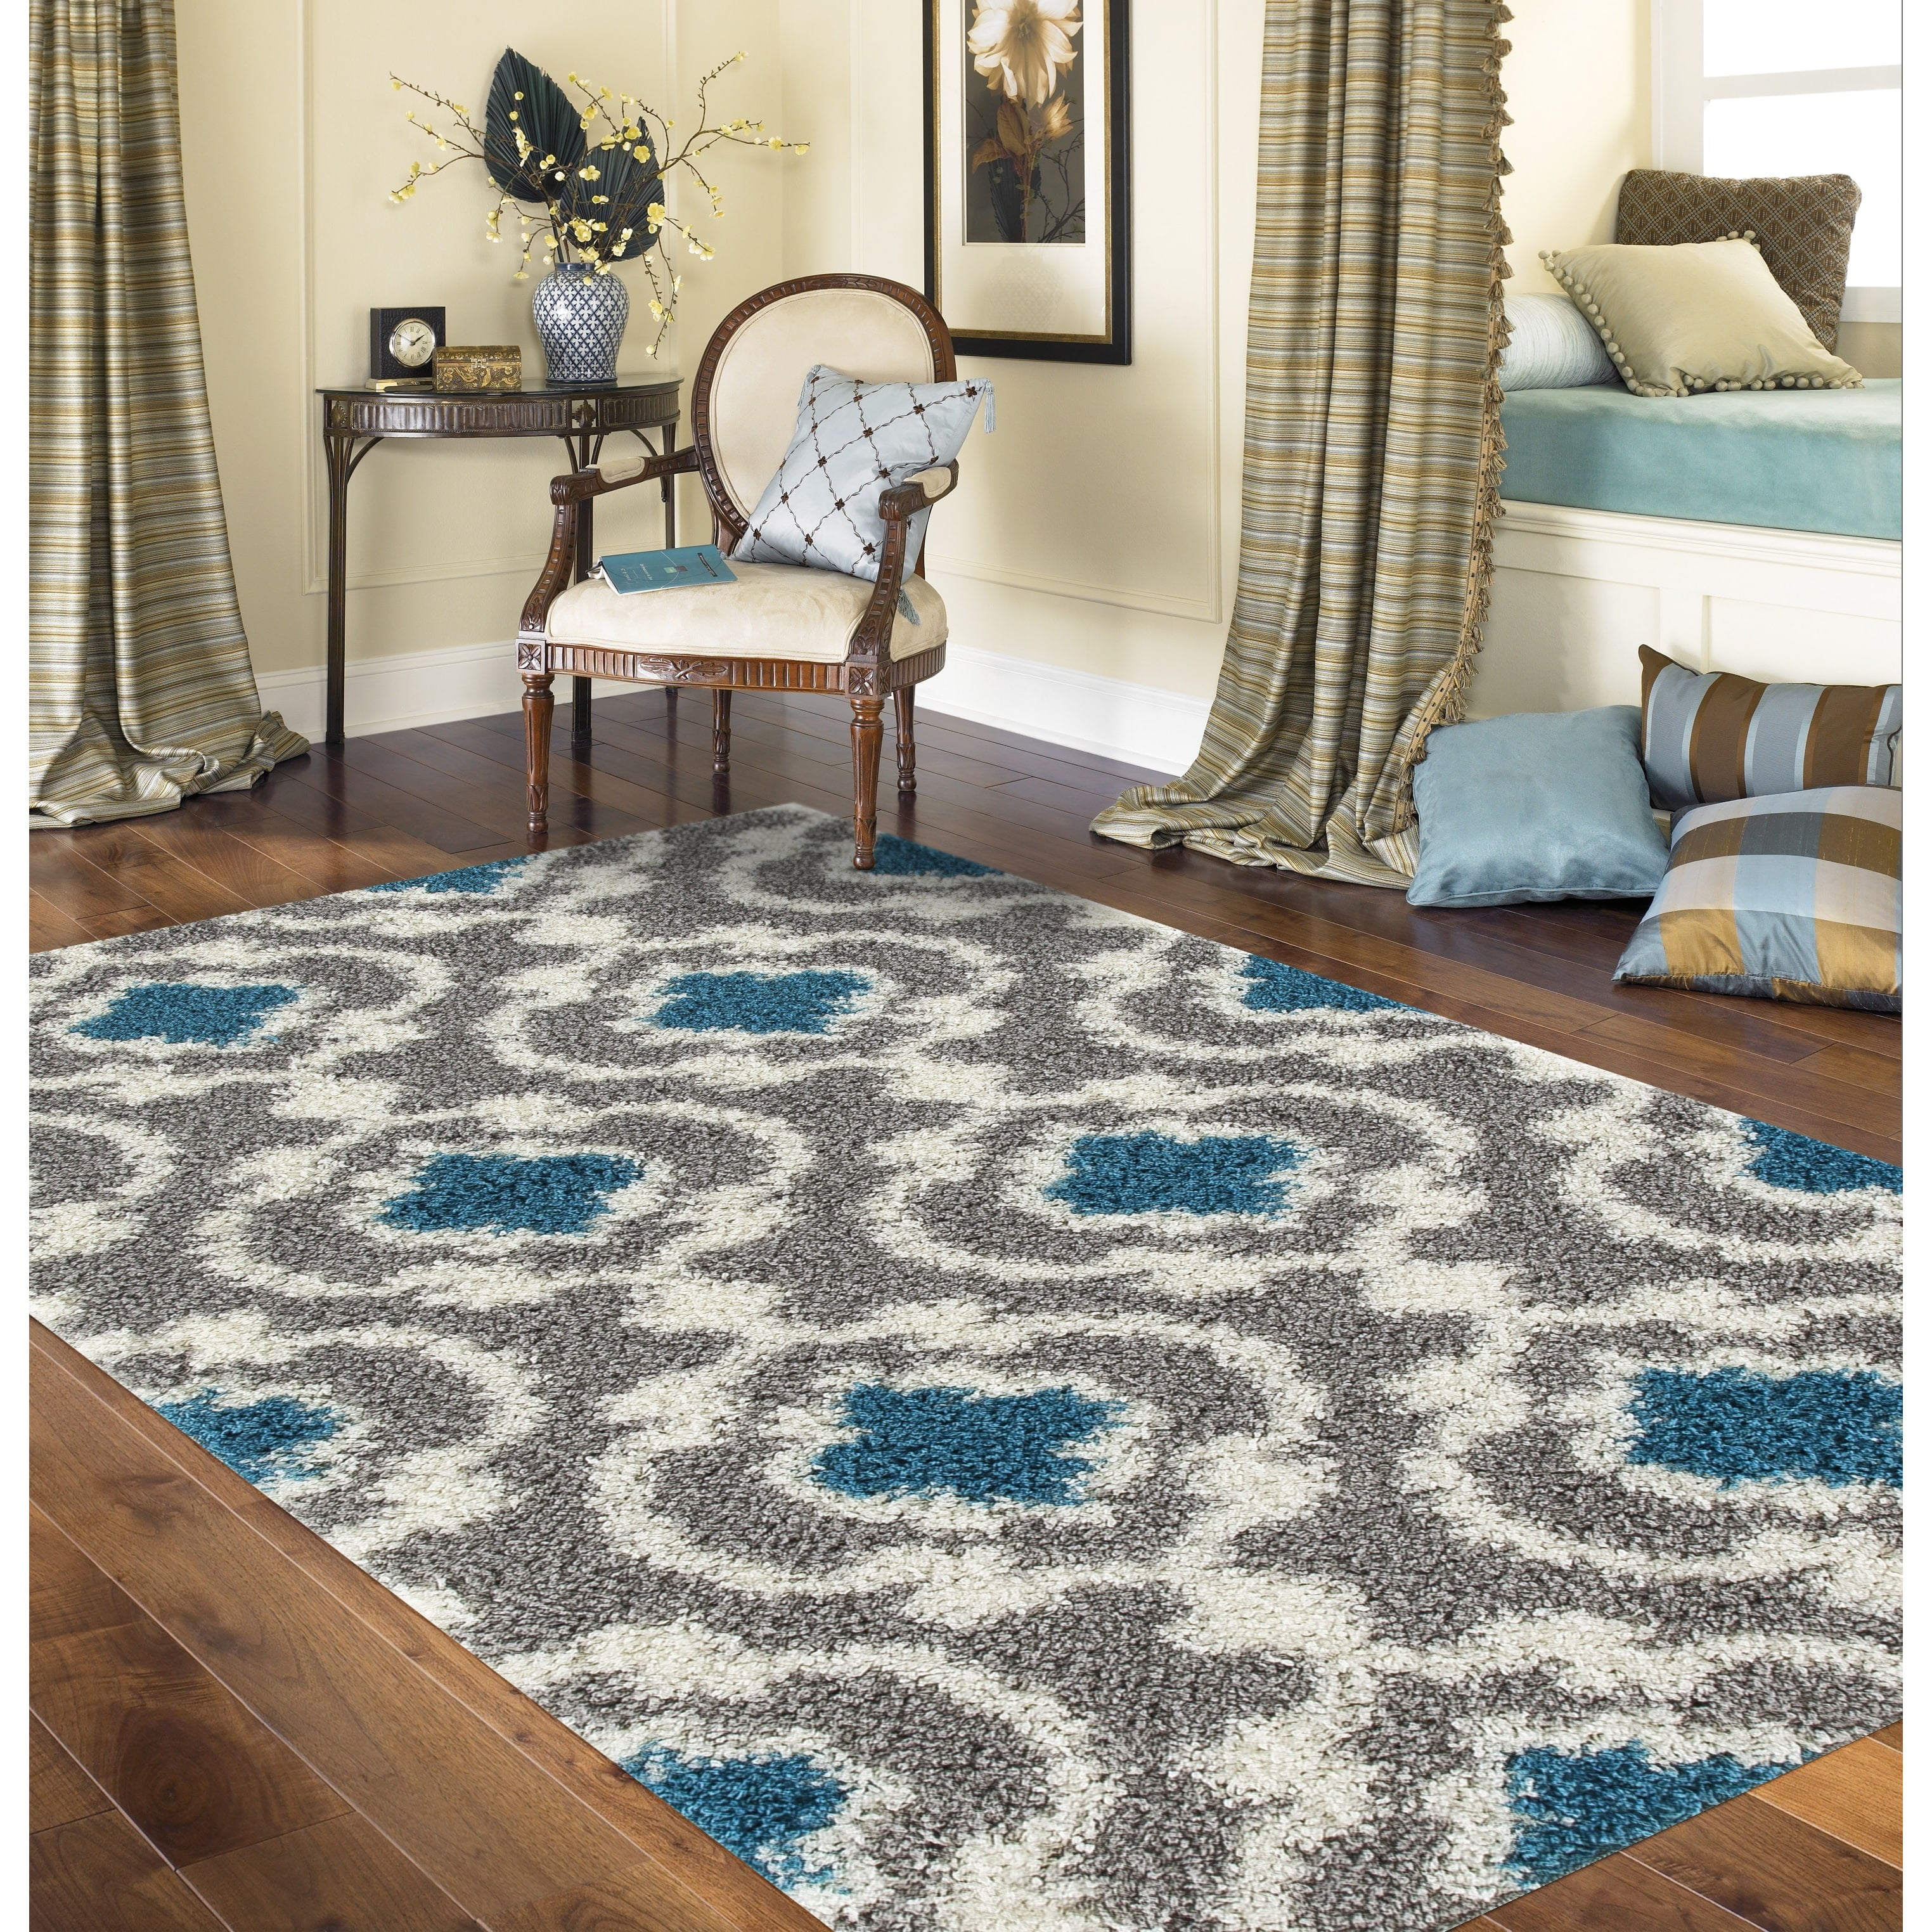 FREE SHIPPING RUG TURQUOISE CARPET 3028 TURQUOISE MOROCCAN TRELLIS AREA RUG NEW 